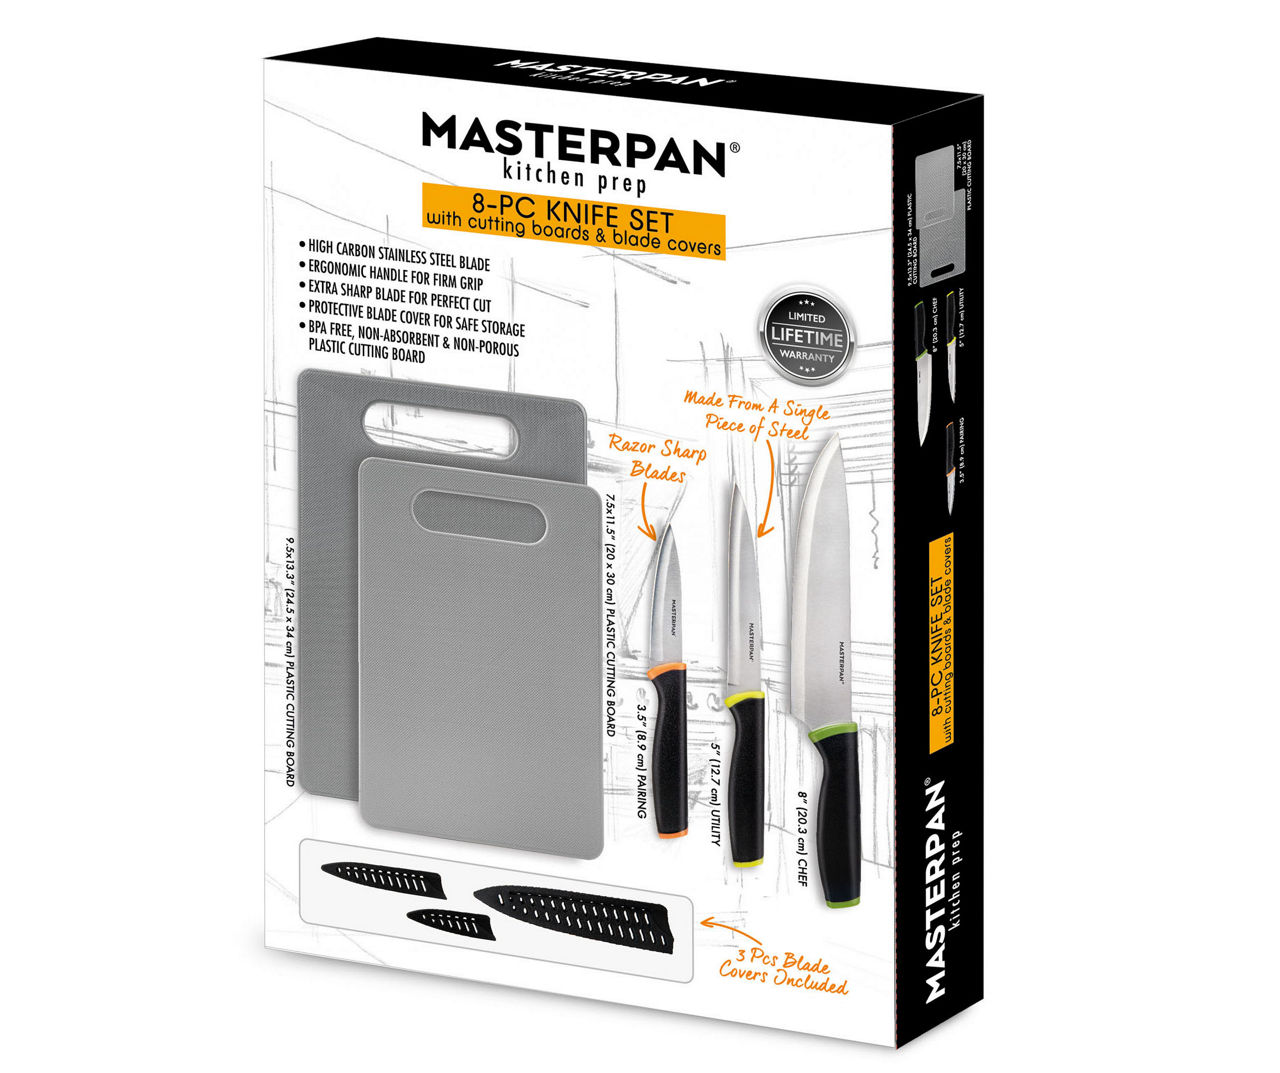 MasterPan Knife Set with Protective Blade Covers, Stainless Steel Blade & Non-Slip Handle - 8 Piece